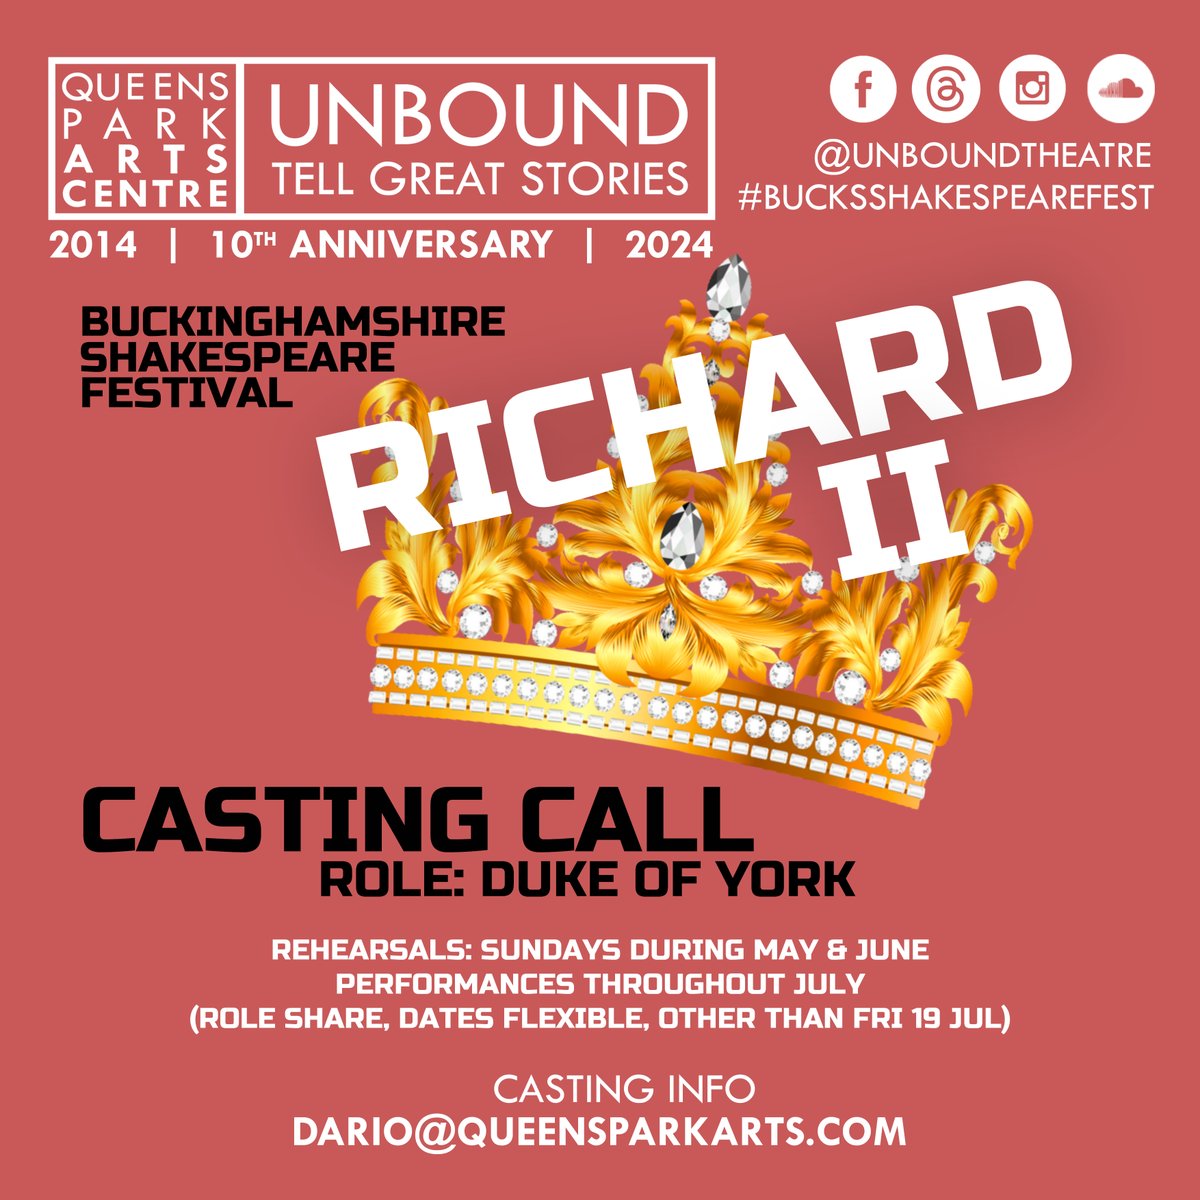 CASTING CALL We're looking for a volunteer actor to join our upcoming tour of Richard II, sharing the role of the Duke of York. We're flexible on which performances you cover, but you must be available for an evening performance on 19 July. Info: dario@queensparkarts.com